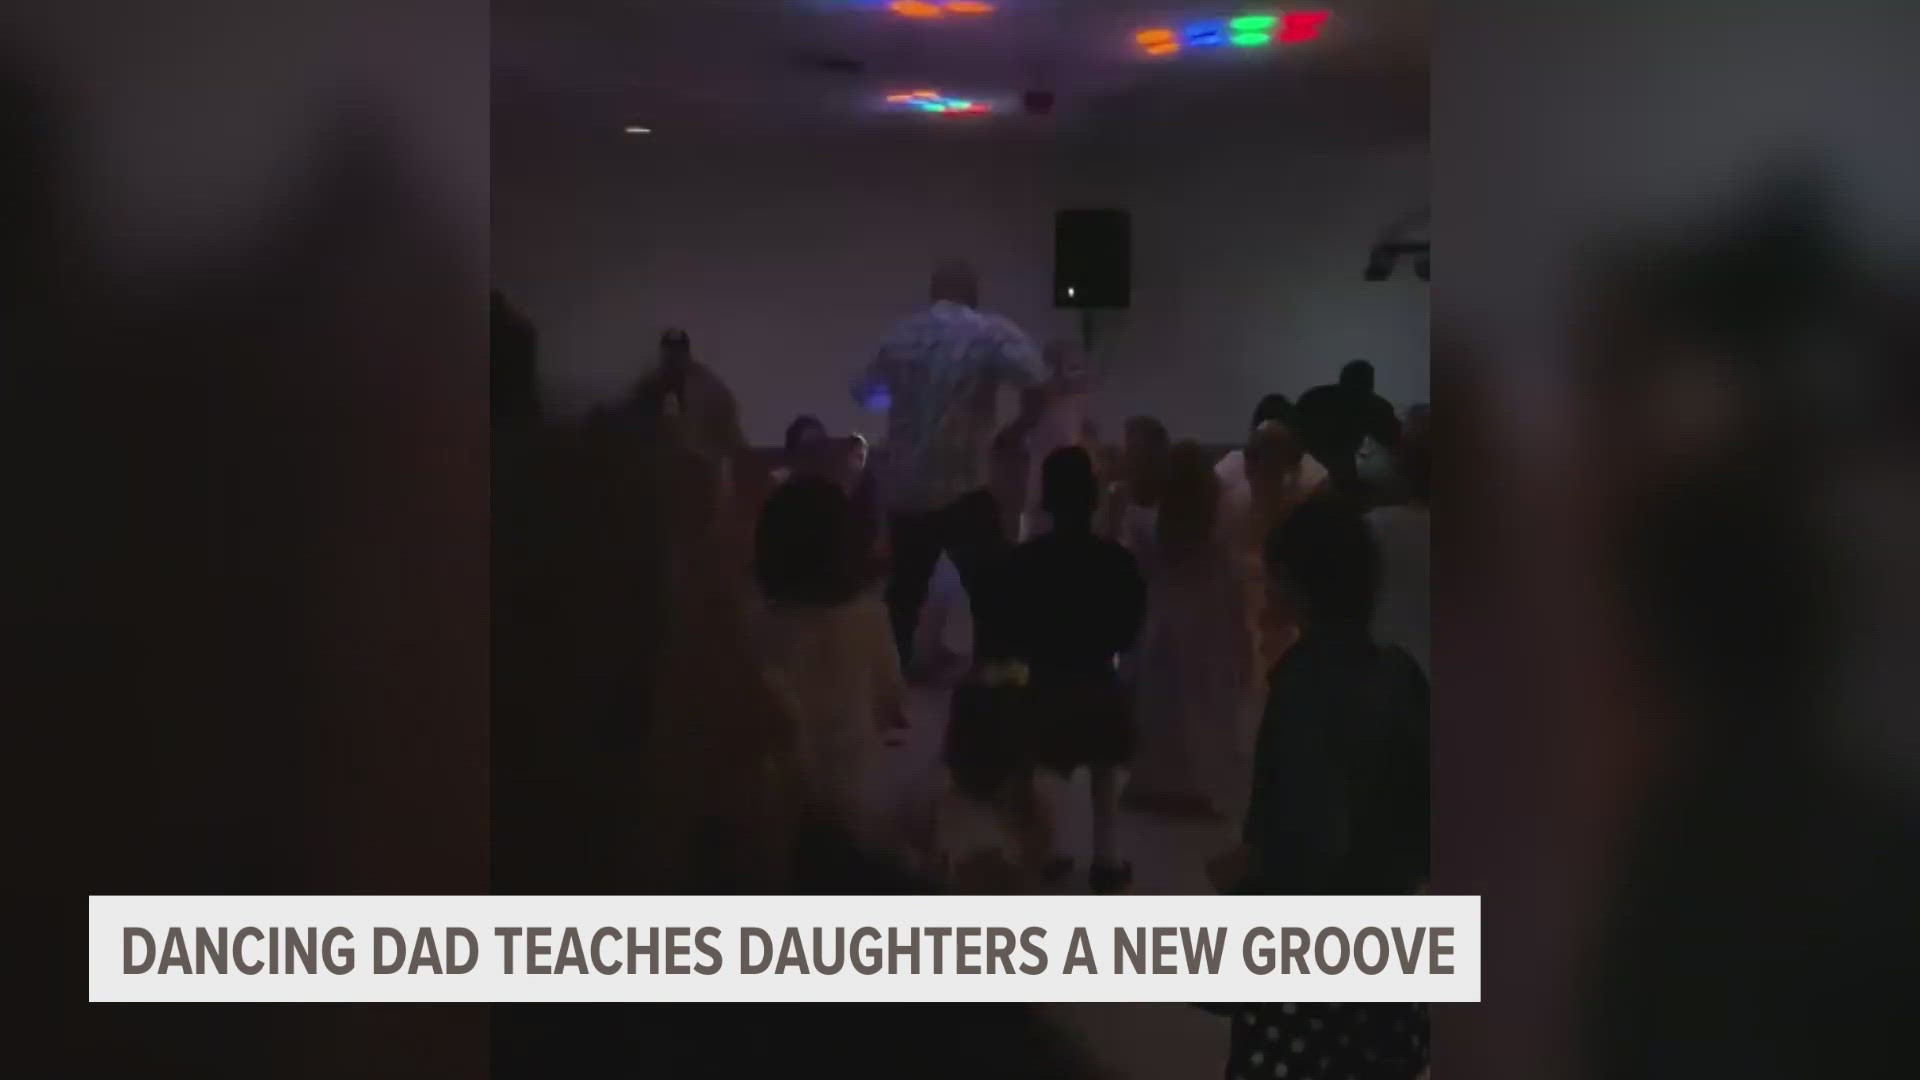 A Portland dad has gone viral over the last 24 hours--
Feeling the groove and making memories his family will cherish for a lifetime.